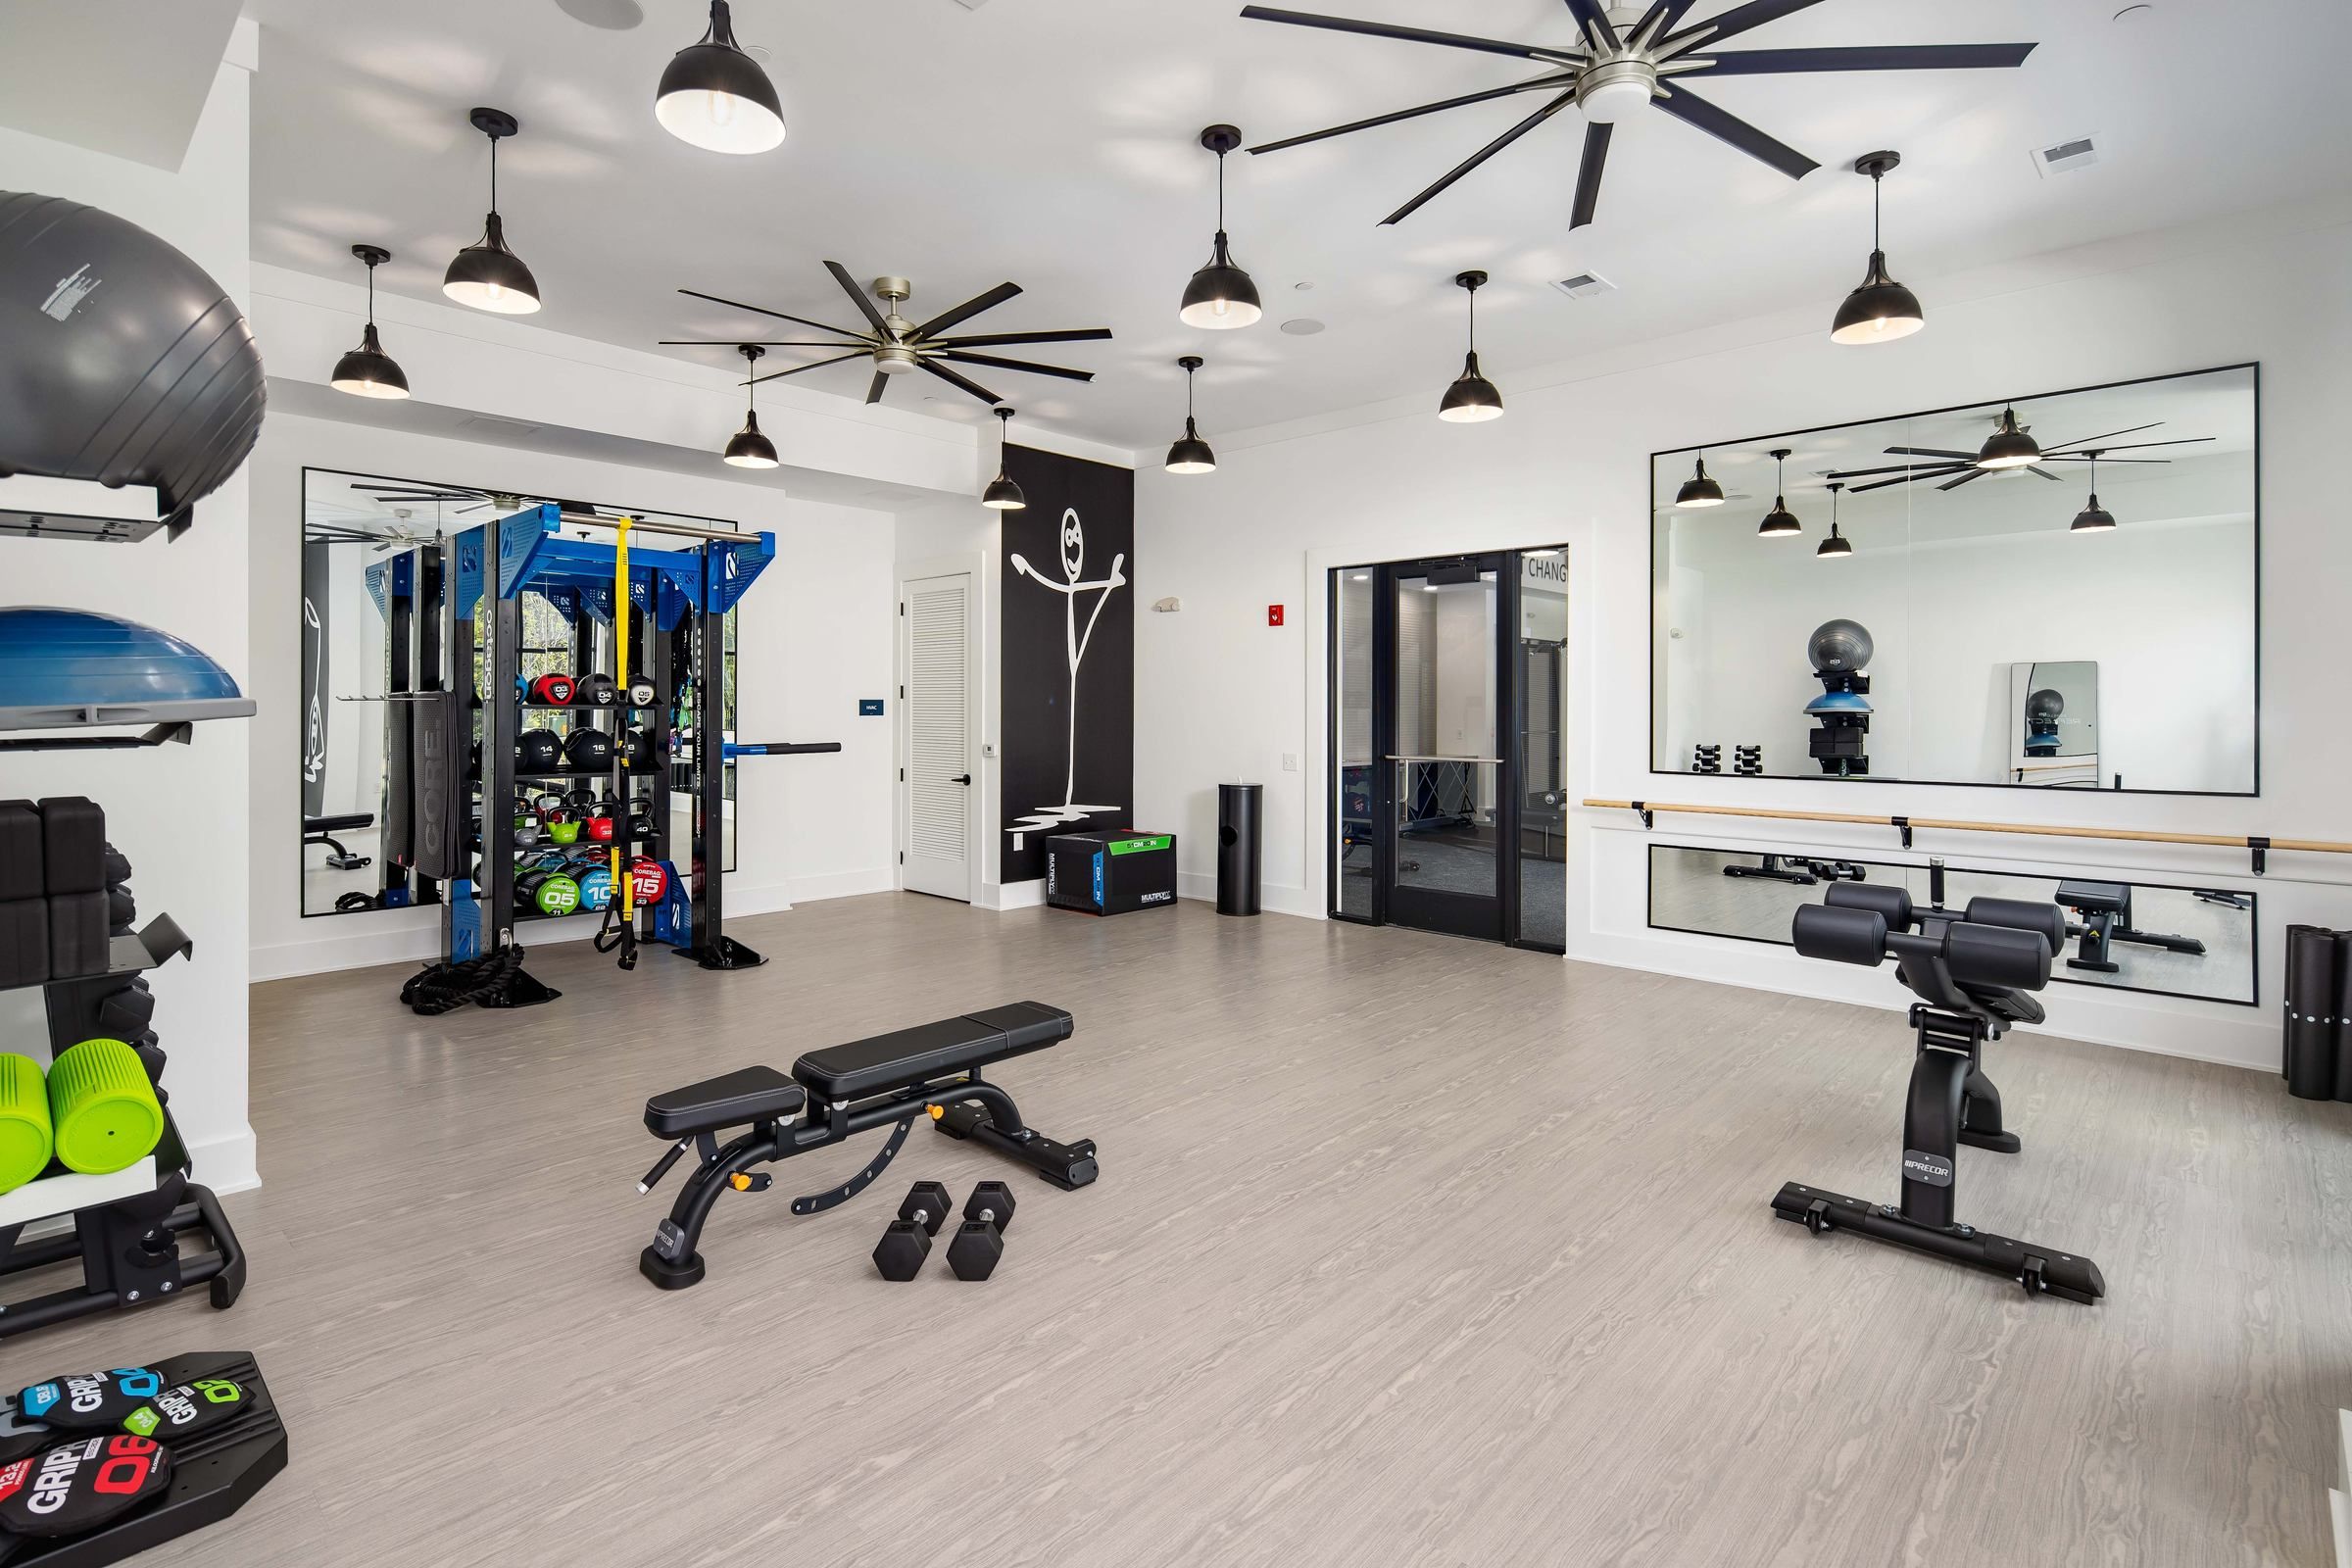 Alta Ashley Park's specialized workout room, featuring a black multi-gym station, colorful weights, and ample space for a variety of exercises.